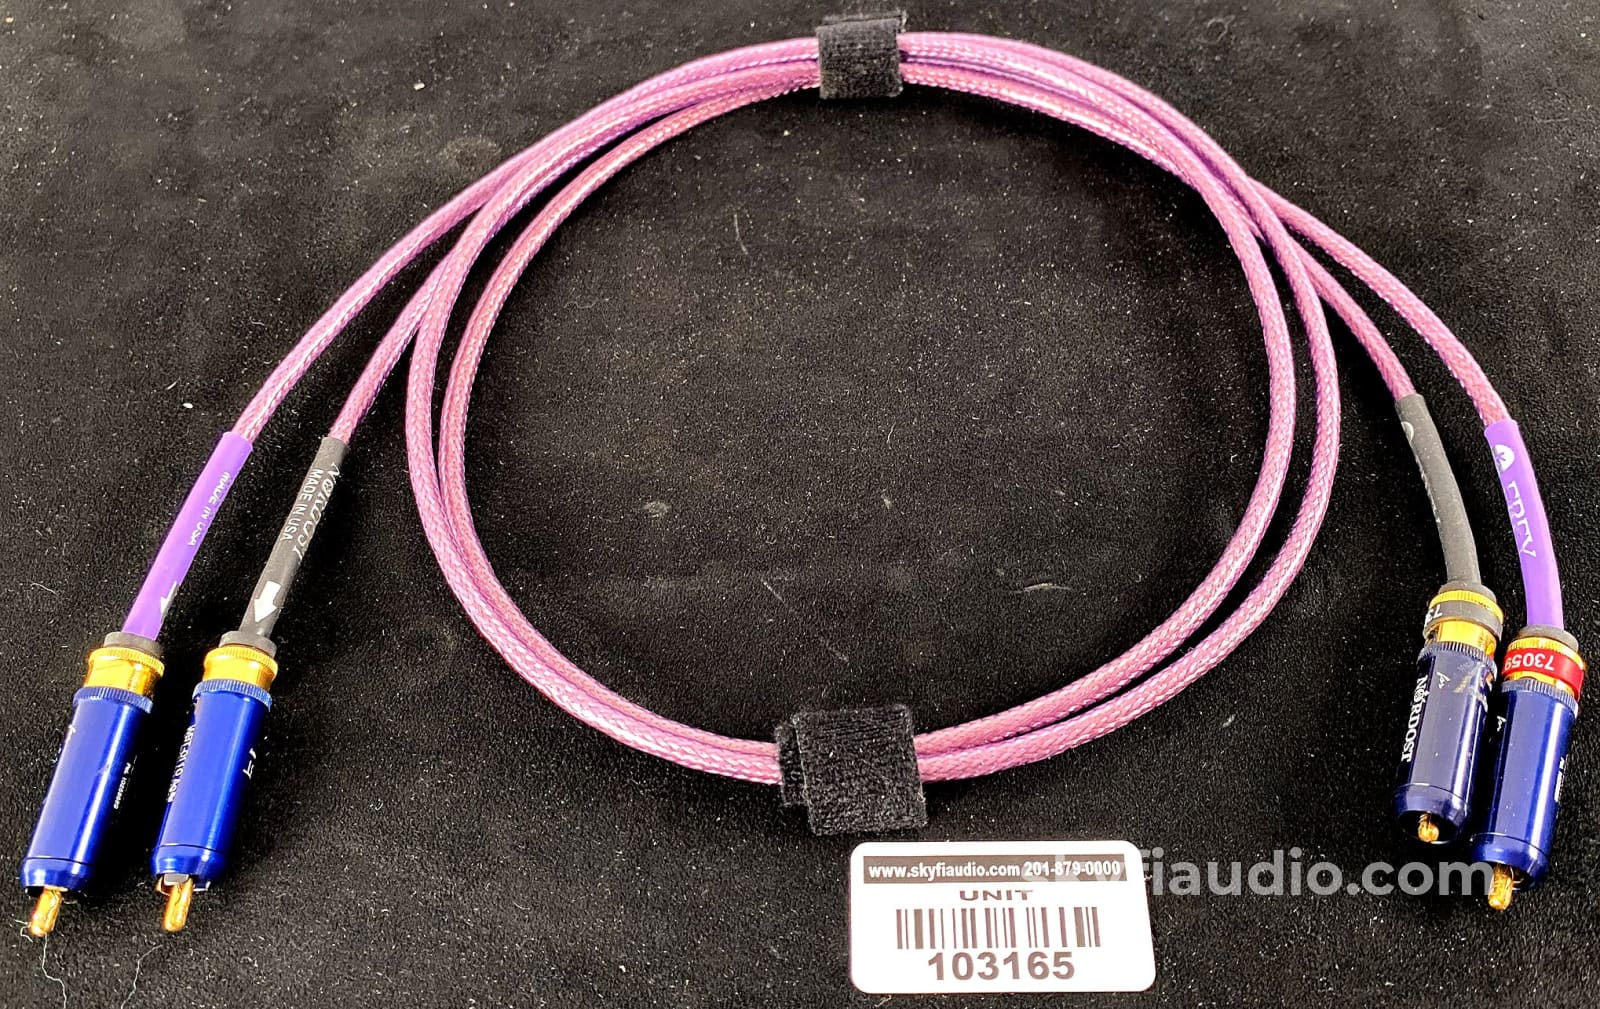 Nordost Frey Rca Audio Cable - 1M Cables